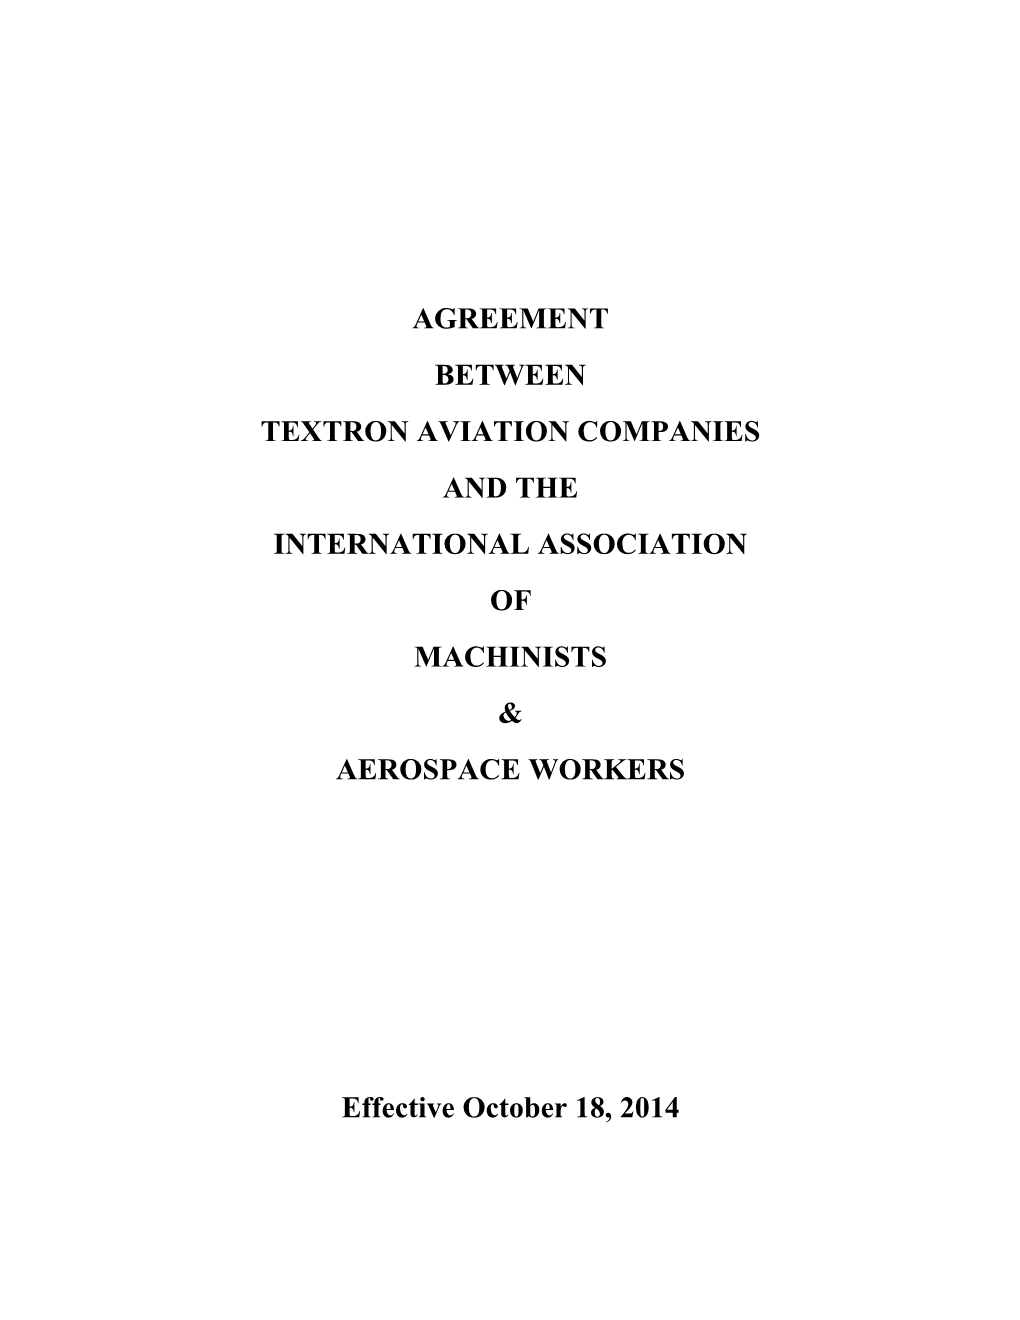 Textron Aviation Companies and the International Association of Machinists & Aerospace Workers